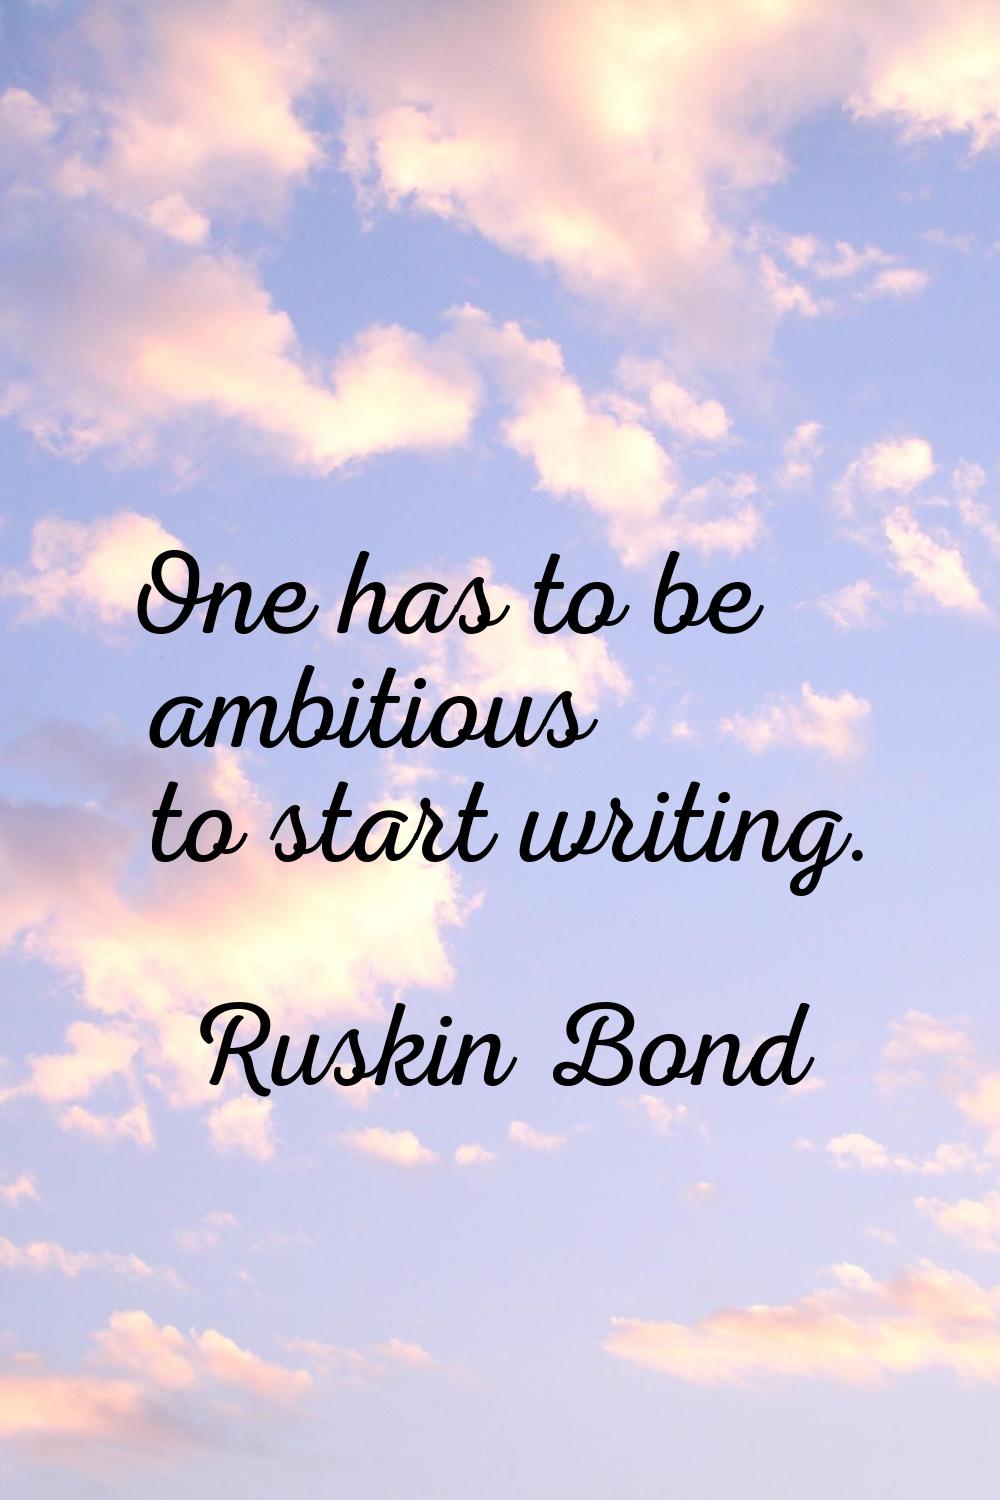 One has to be ambitious to start writing.